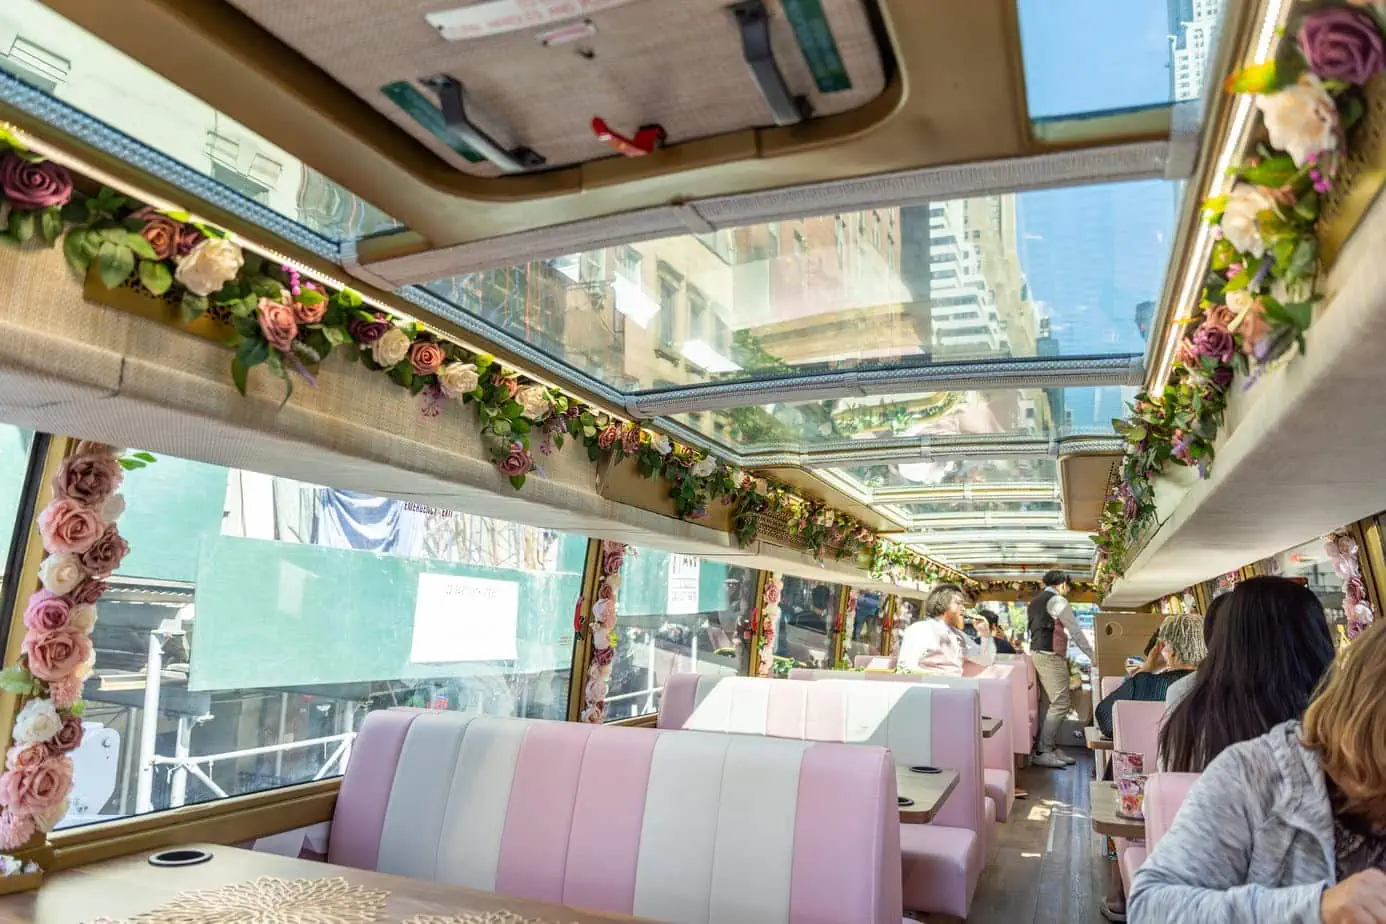 Tea Around Town bus interior adorned with pink and white striped leather seats and ceiling windows surrounded by flowers 